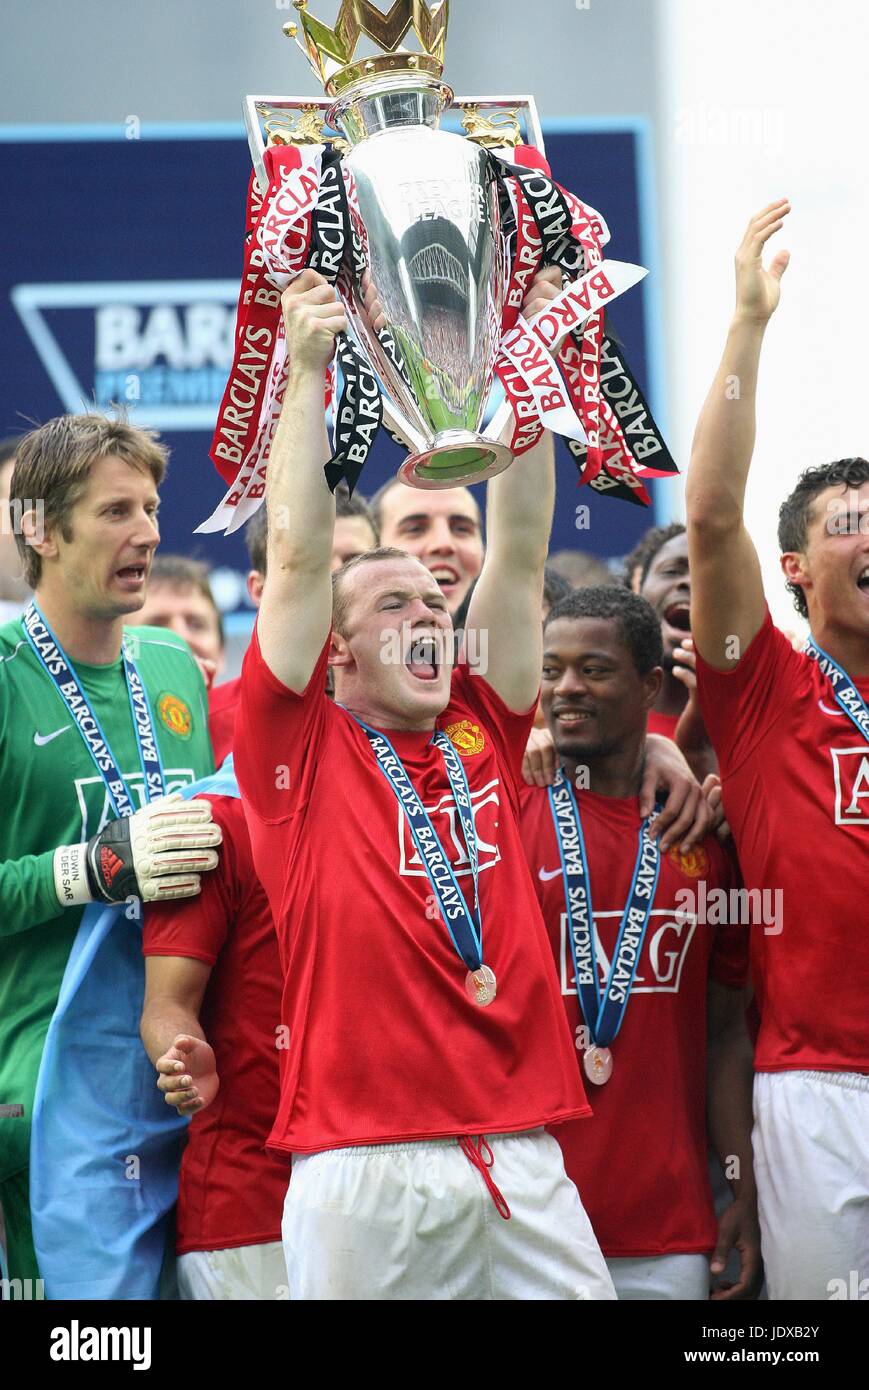 WAYNE ROONEY WITH TROPHY, BARCLAYS PREMIER LEAGUE WINNERS 07/08, WIGAN V MANCHESTER UNITED, 2008 Stock Photo